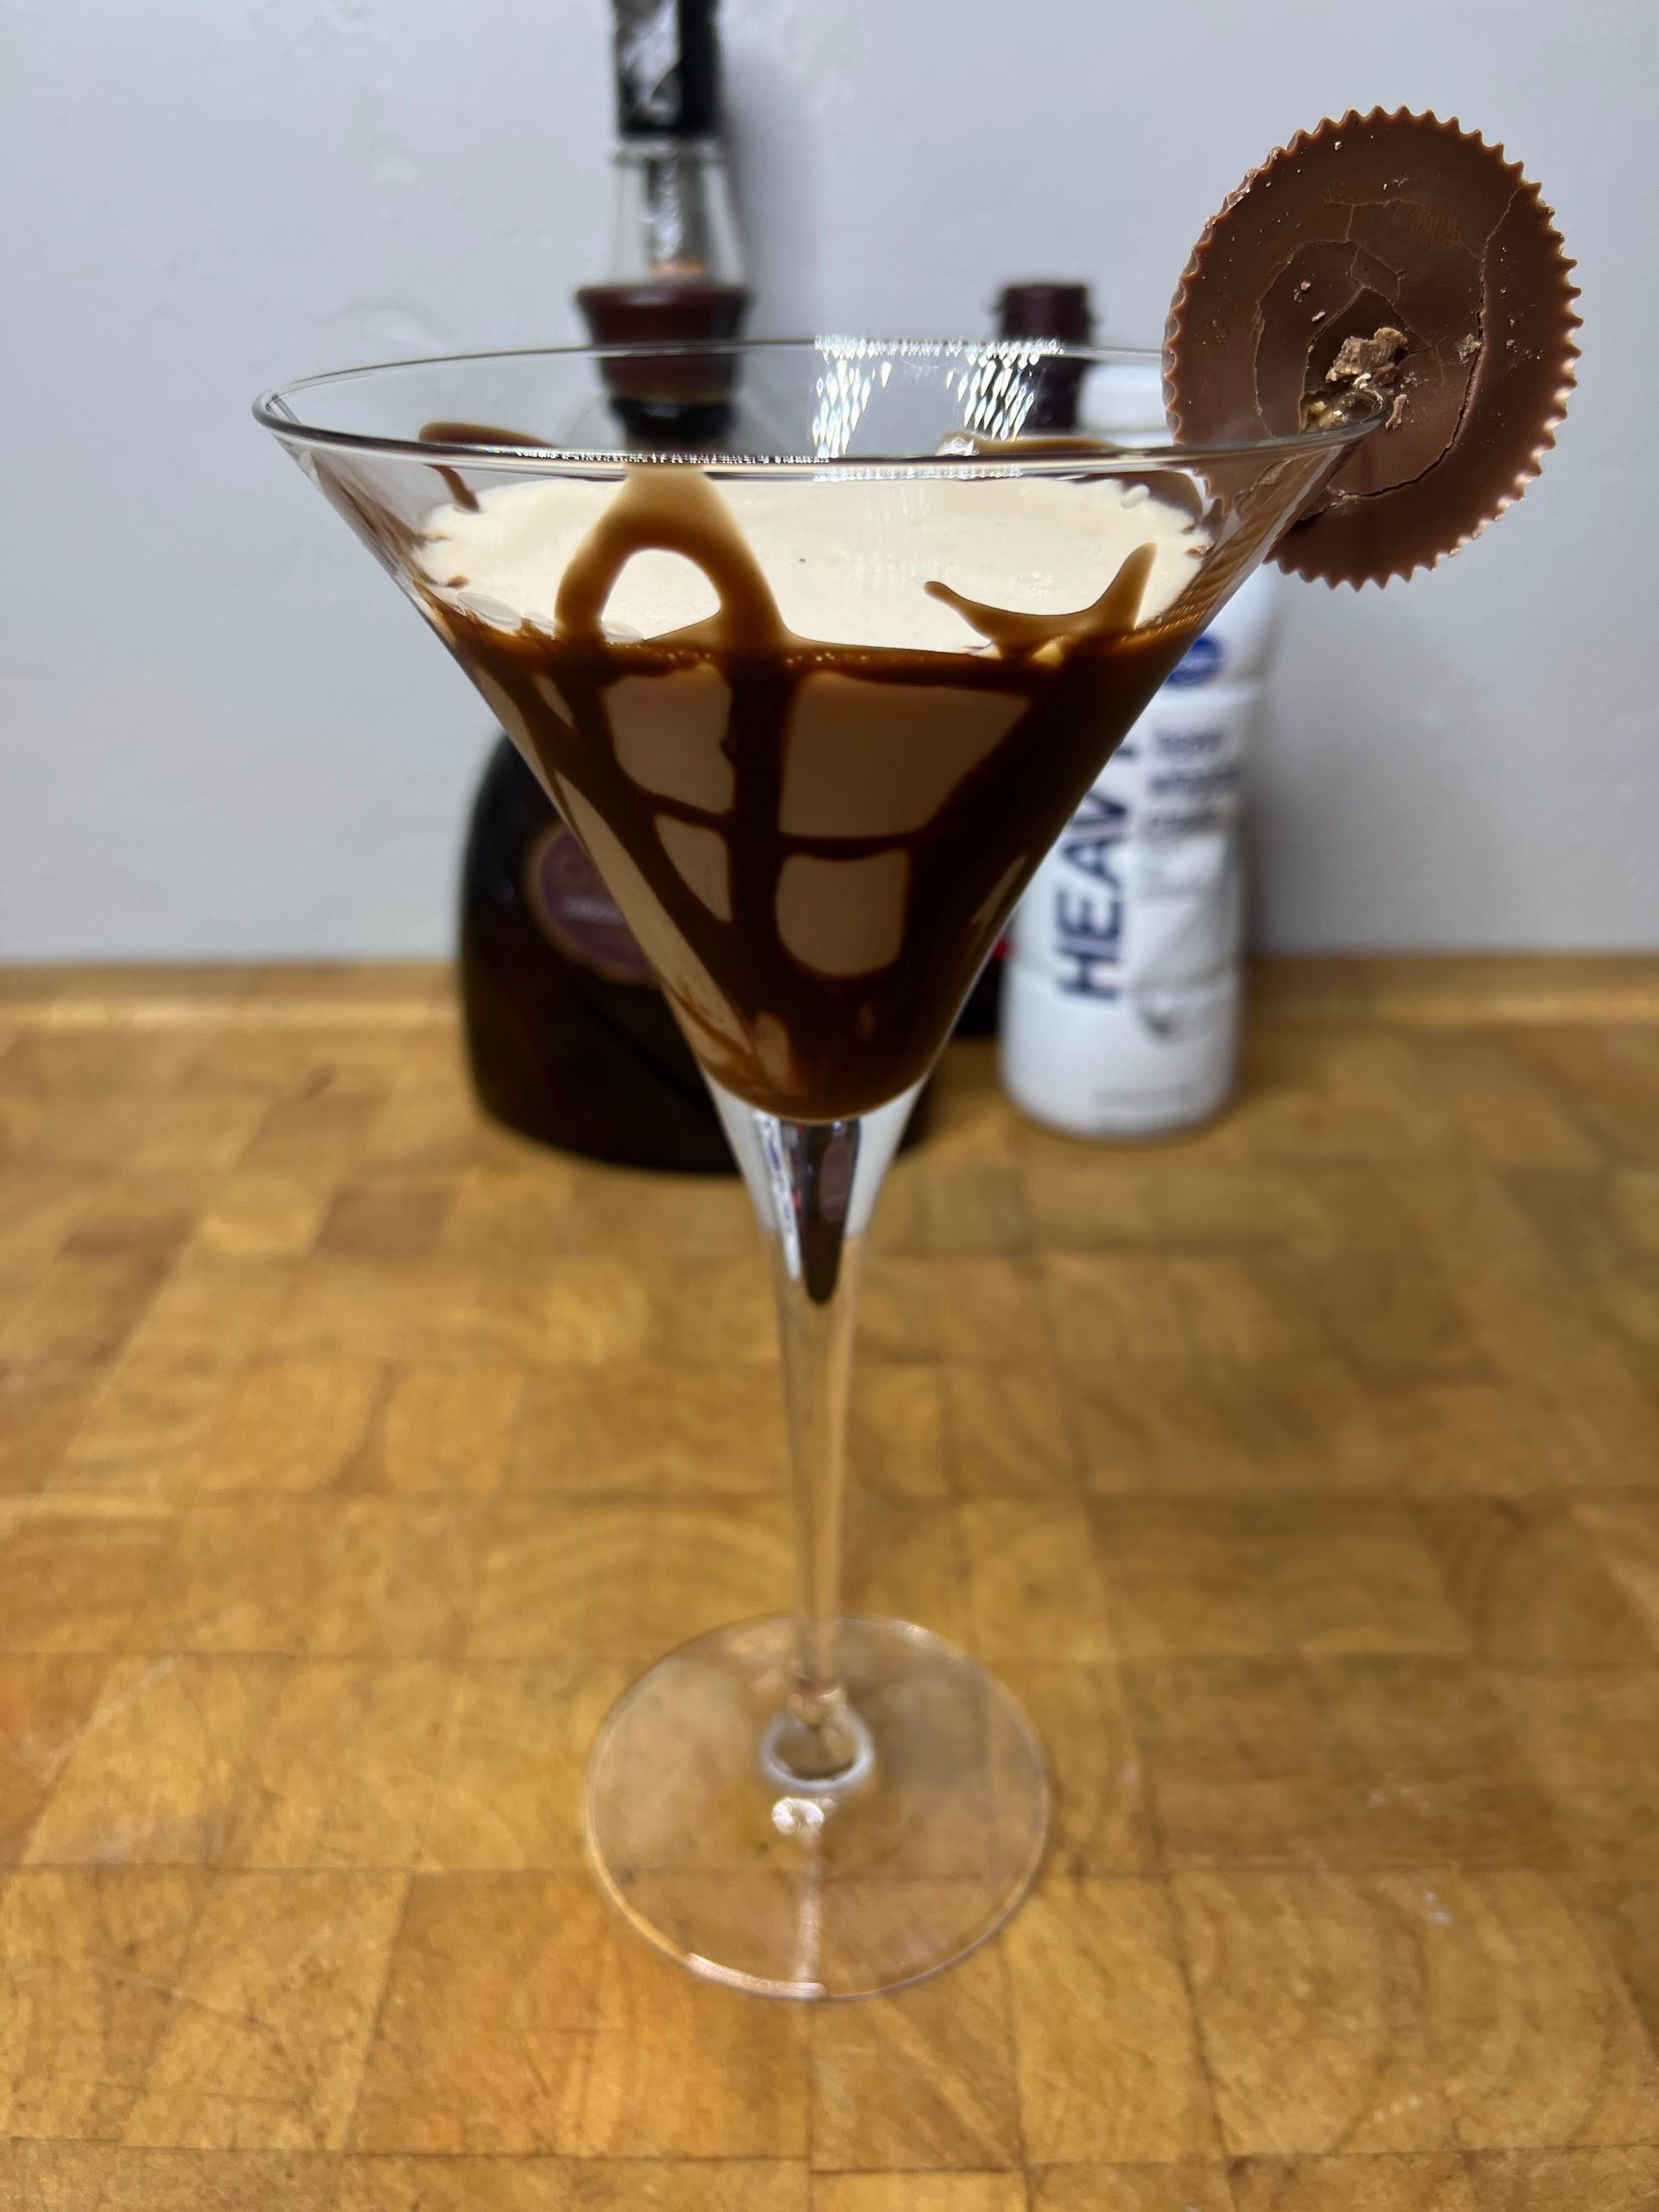 peanut butter cup martini on a wooden table with ingredient bottles in the background